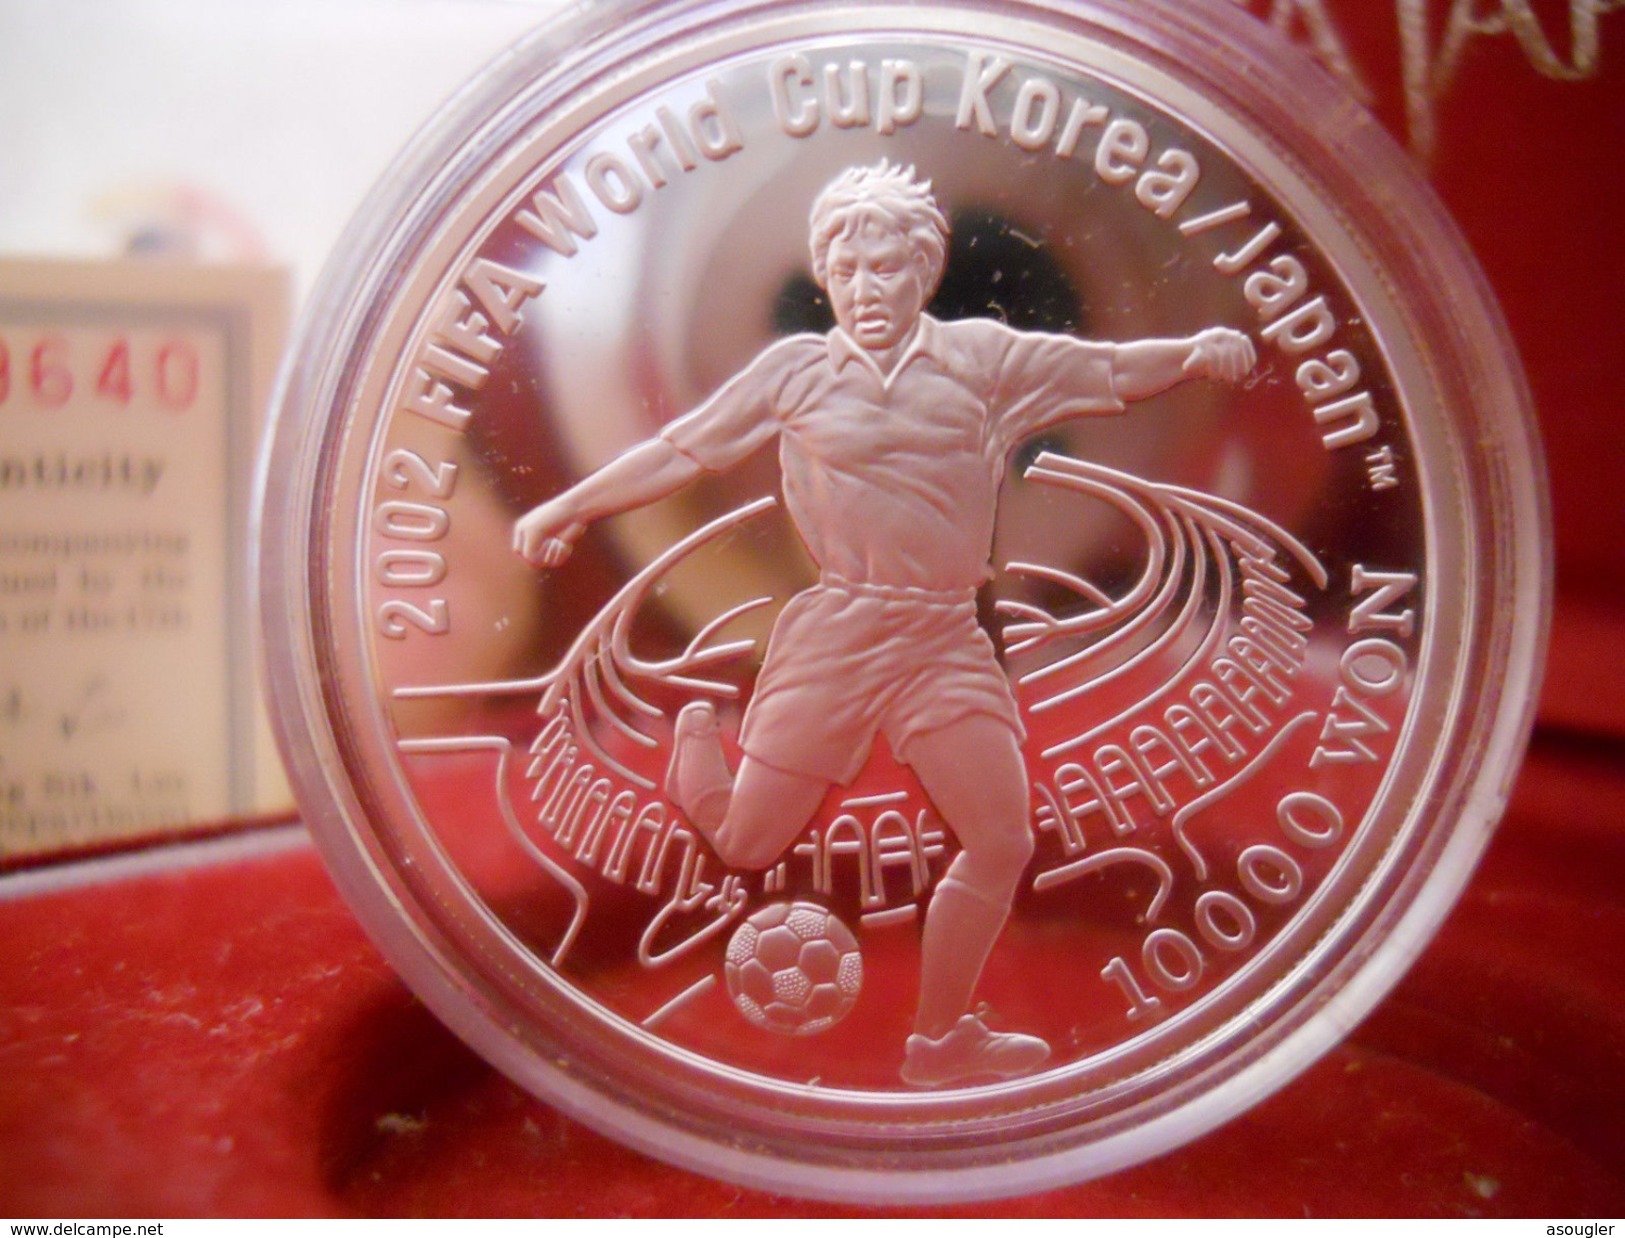 SOUTH KOREA 10000 WON 2001 SILVER PROOF "2002 FIFA WORLD CUP KOREA / JAPAN "free Shipping Via Registered Air Mail!" - Coreal Del Sur